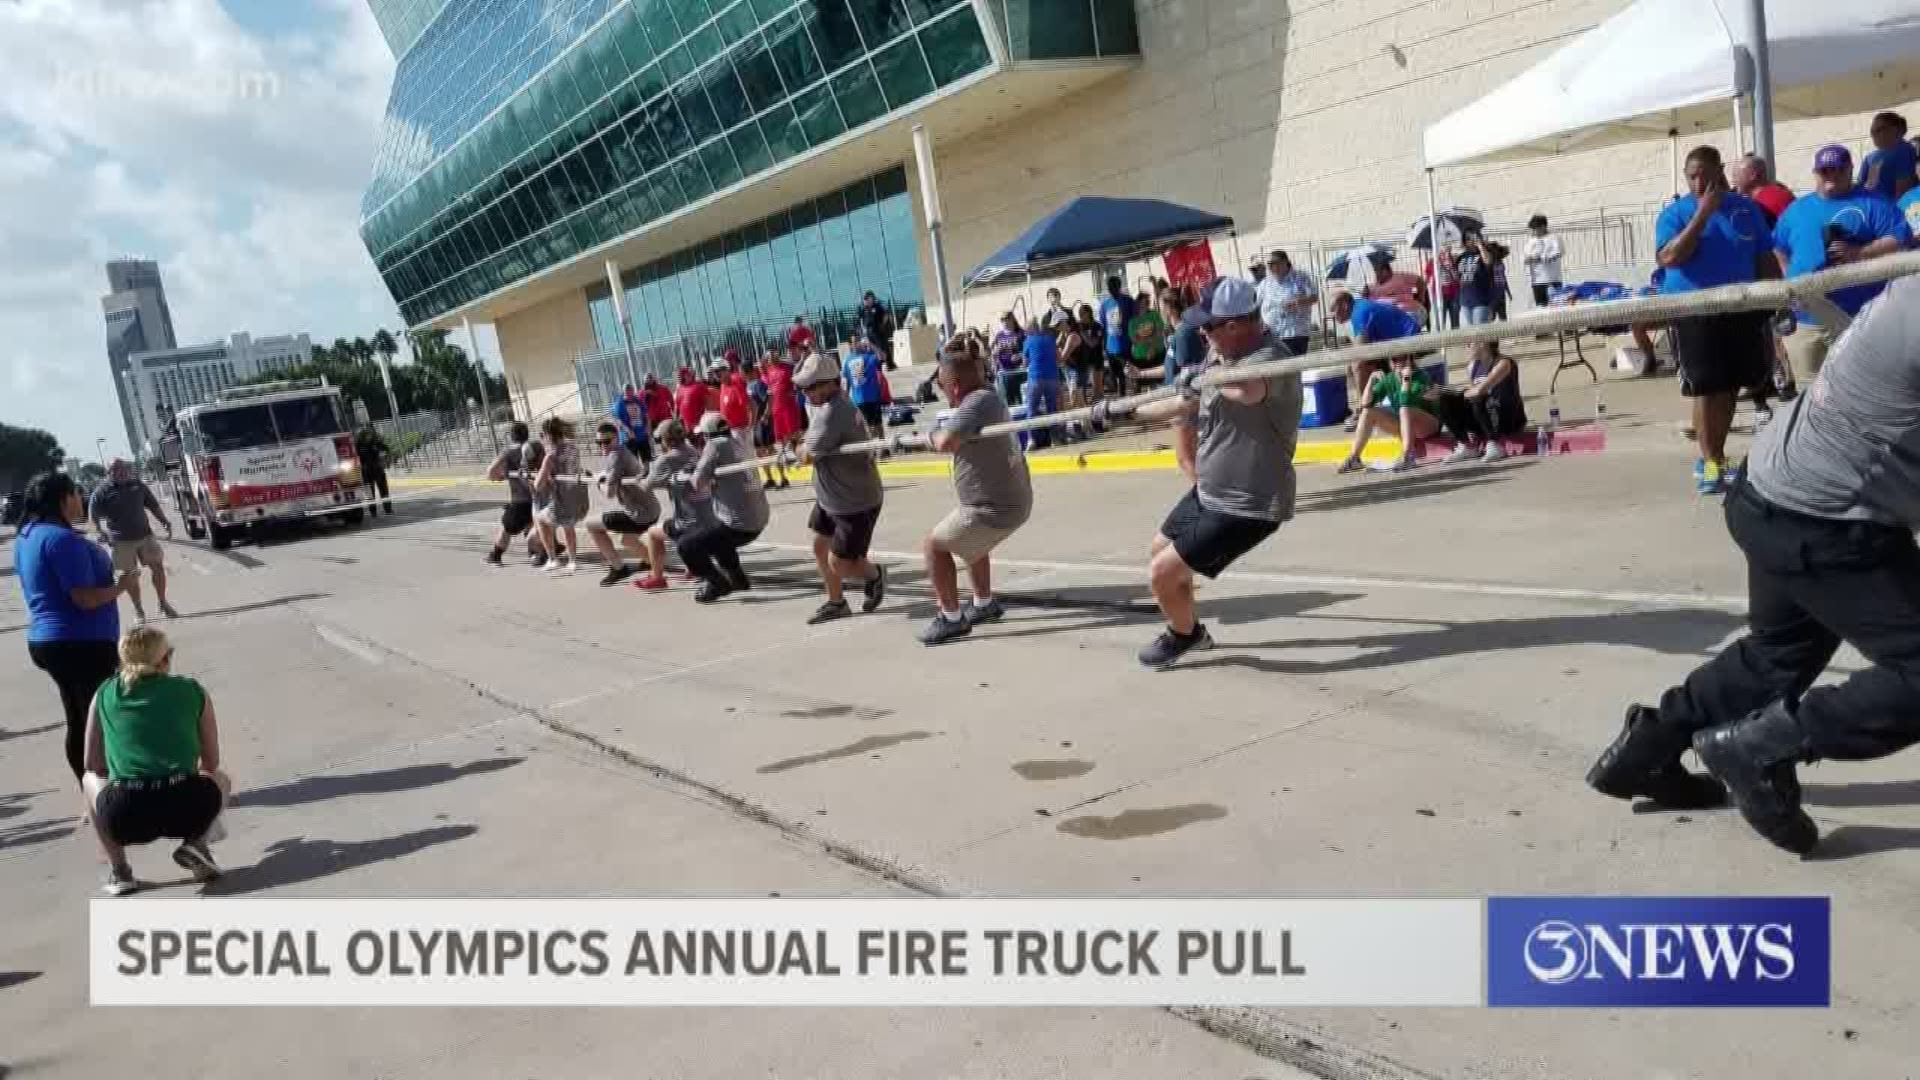 The annual fire truck pull supports the South Texas Special Olympics